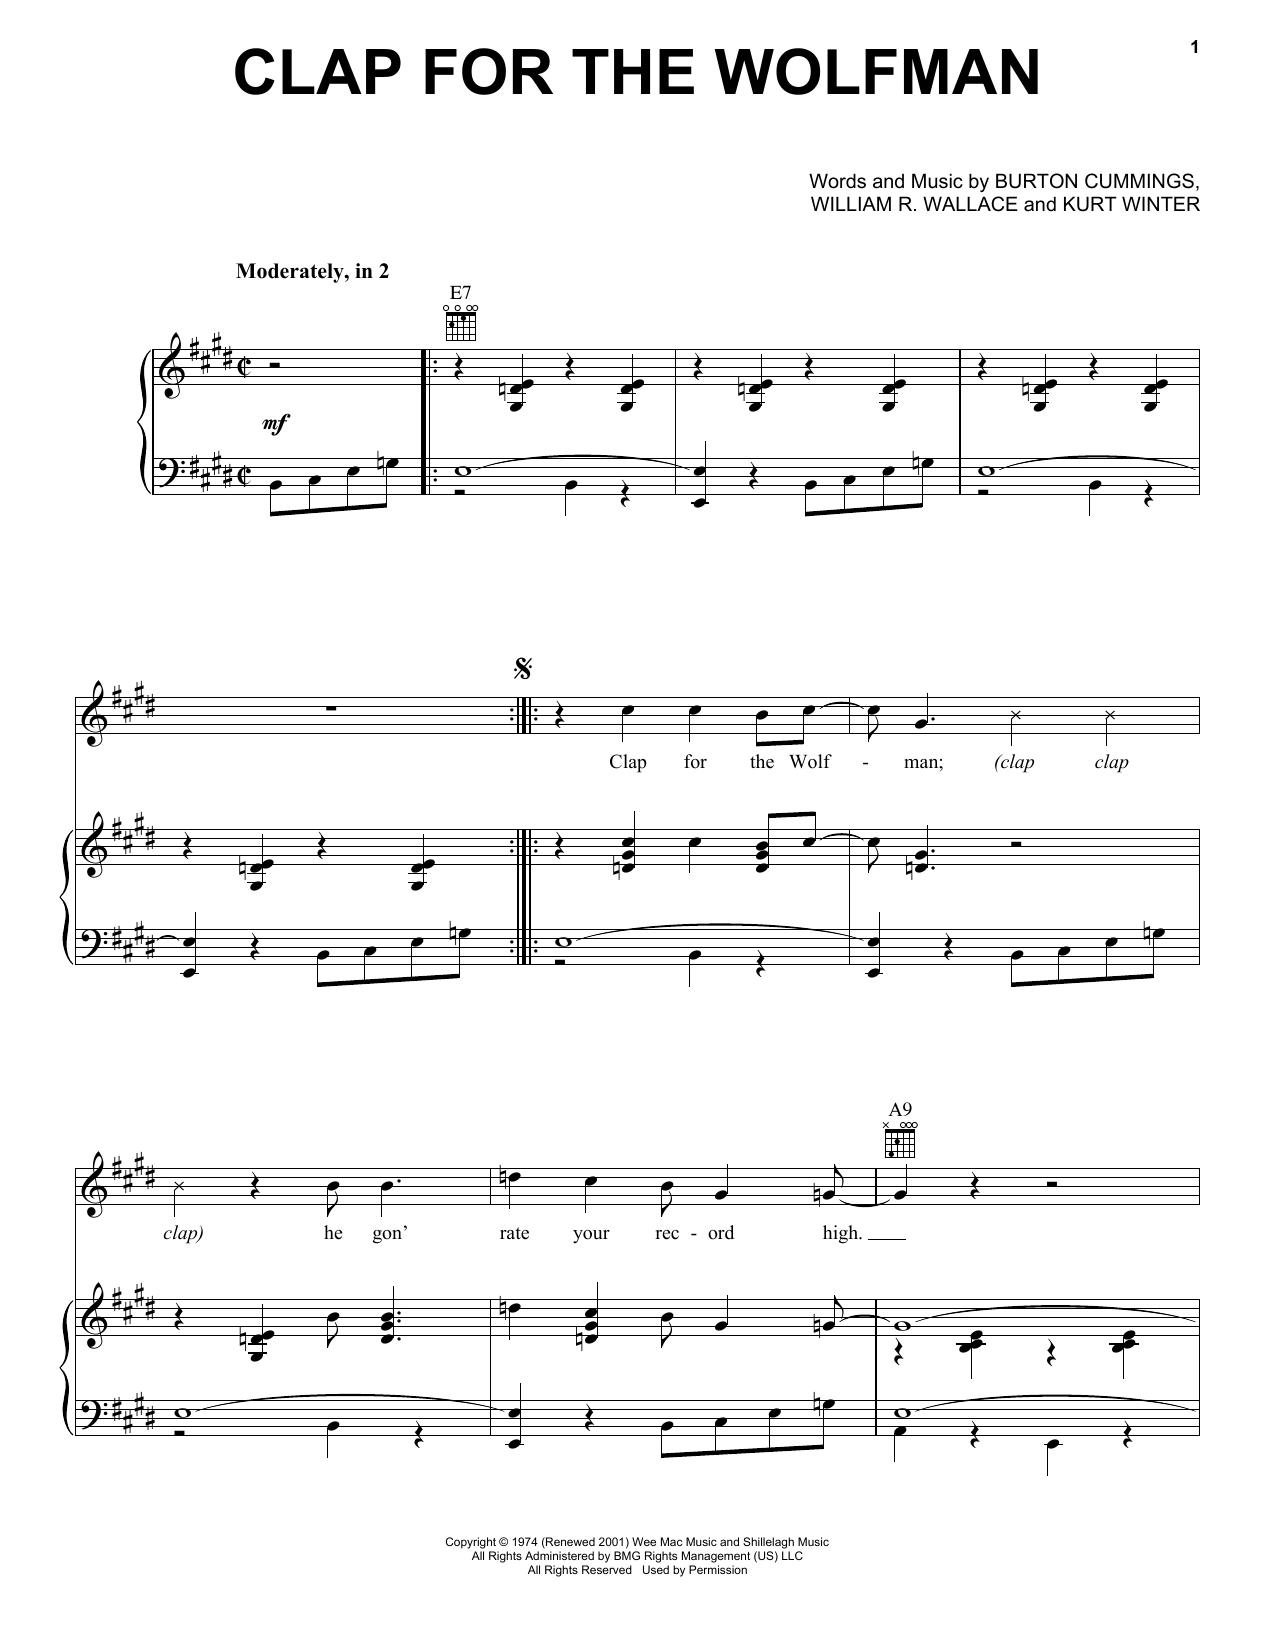 Download The Guess Who Clap For The Wolfman Sheet Music